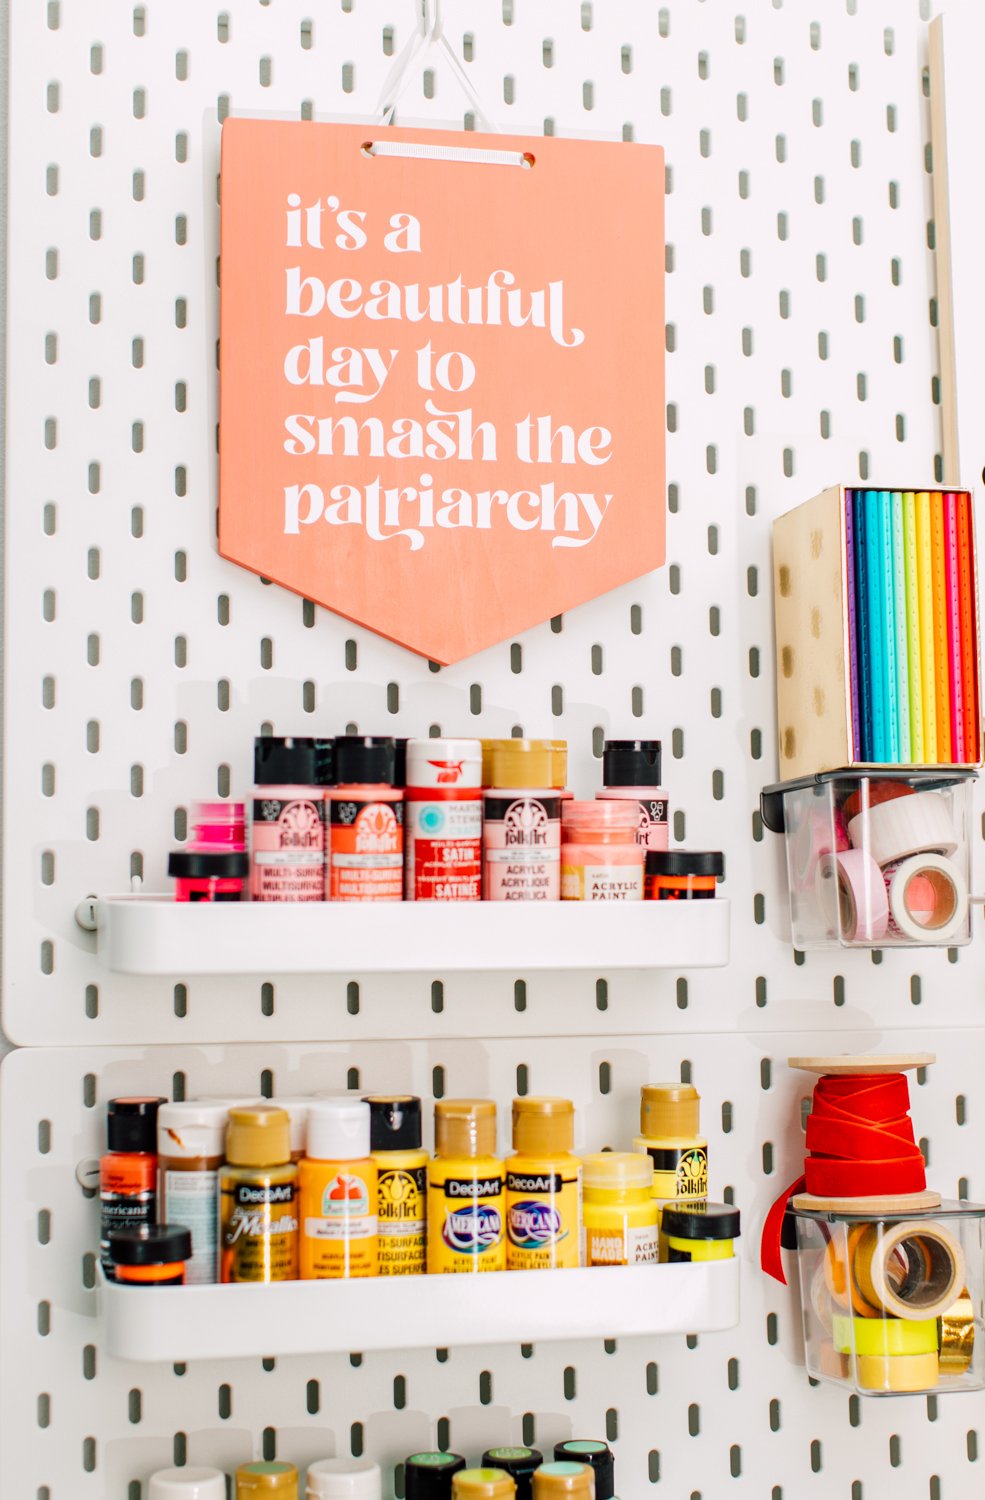 Pegboard with paint and a homemade sign that says "it's a beautiful day to smash the patriarchy"